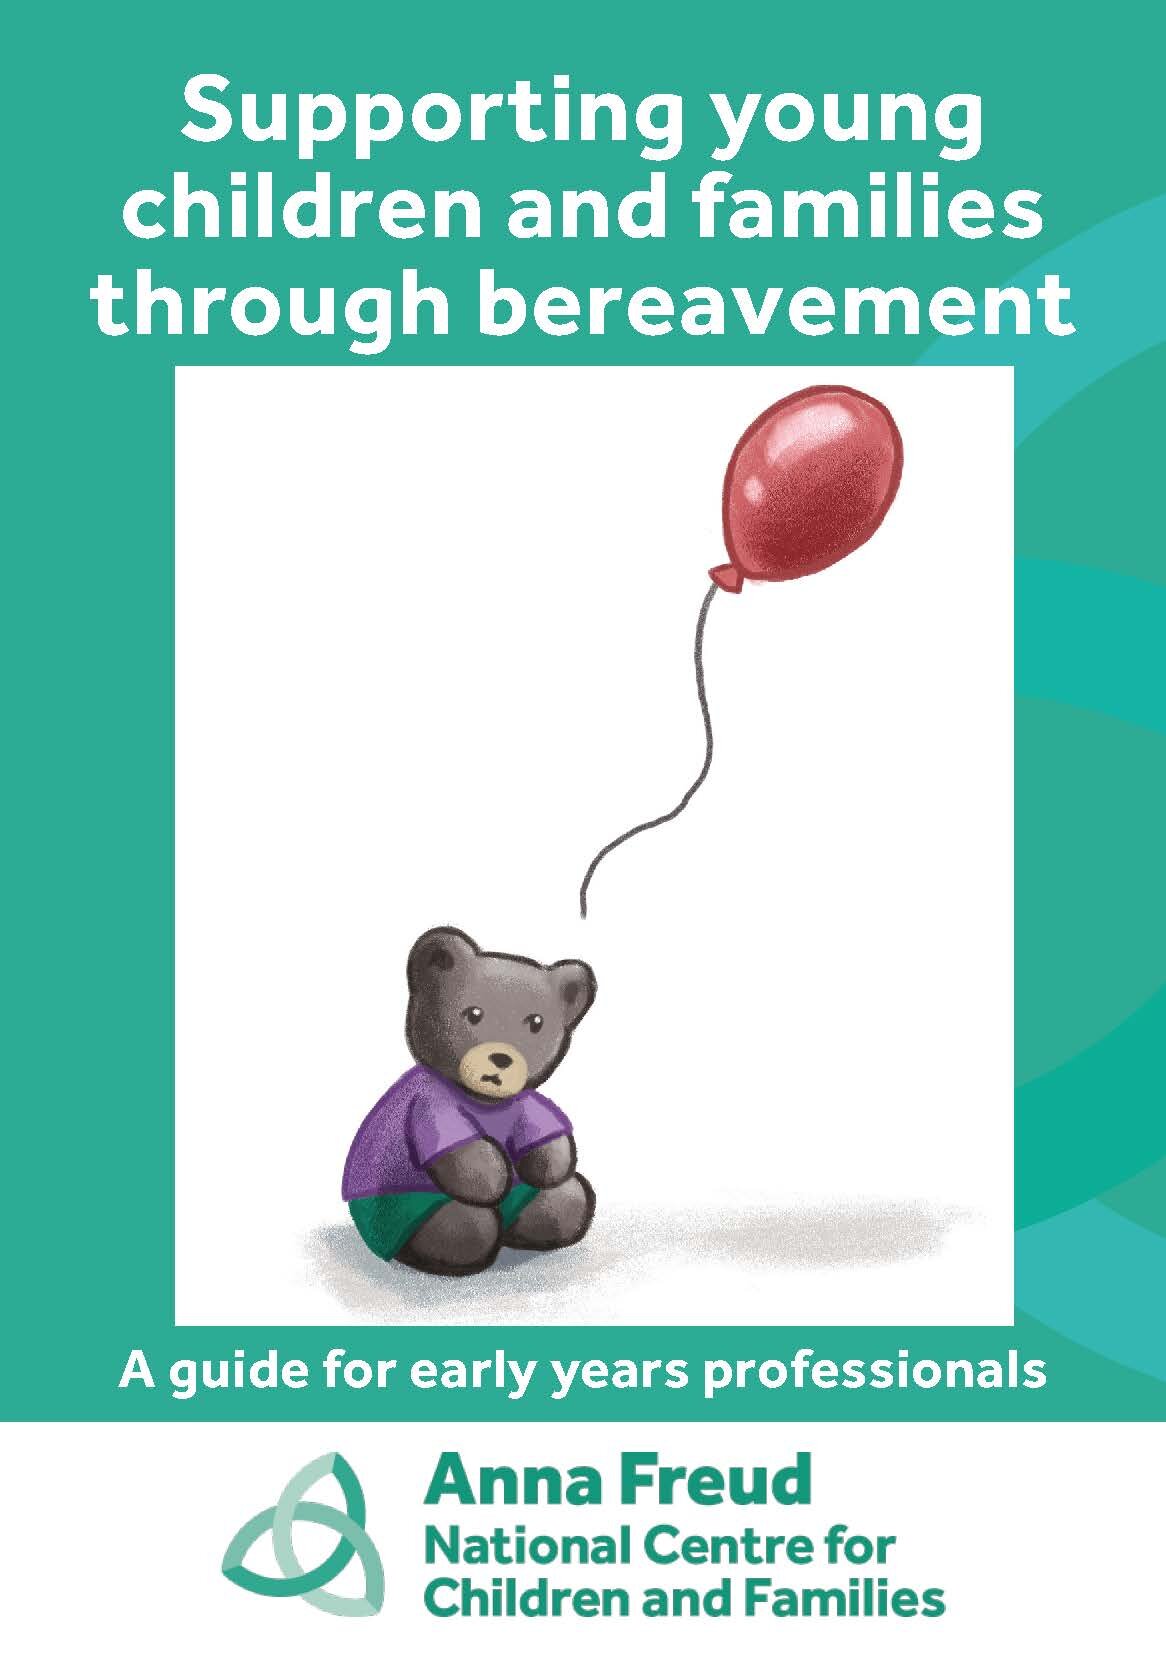 Supporting young children and families through bereavement booklet